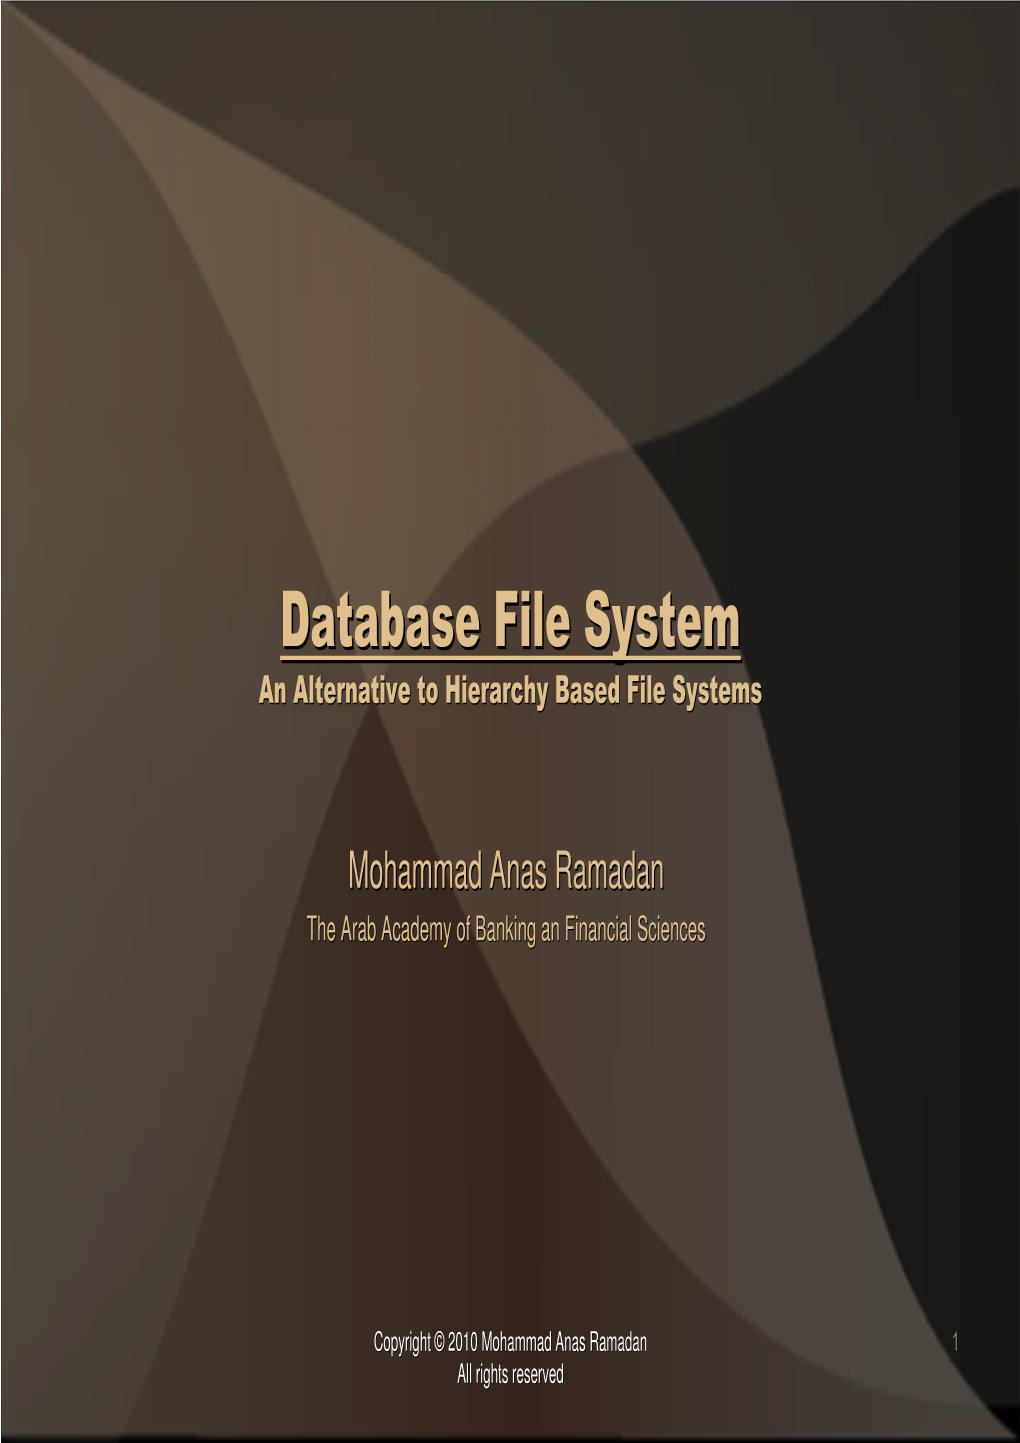 Database File System - an Overview ♦ Database File System - Internally ♦ Conclusion